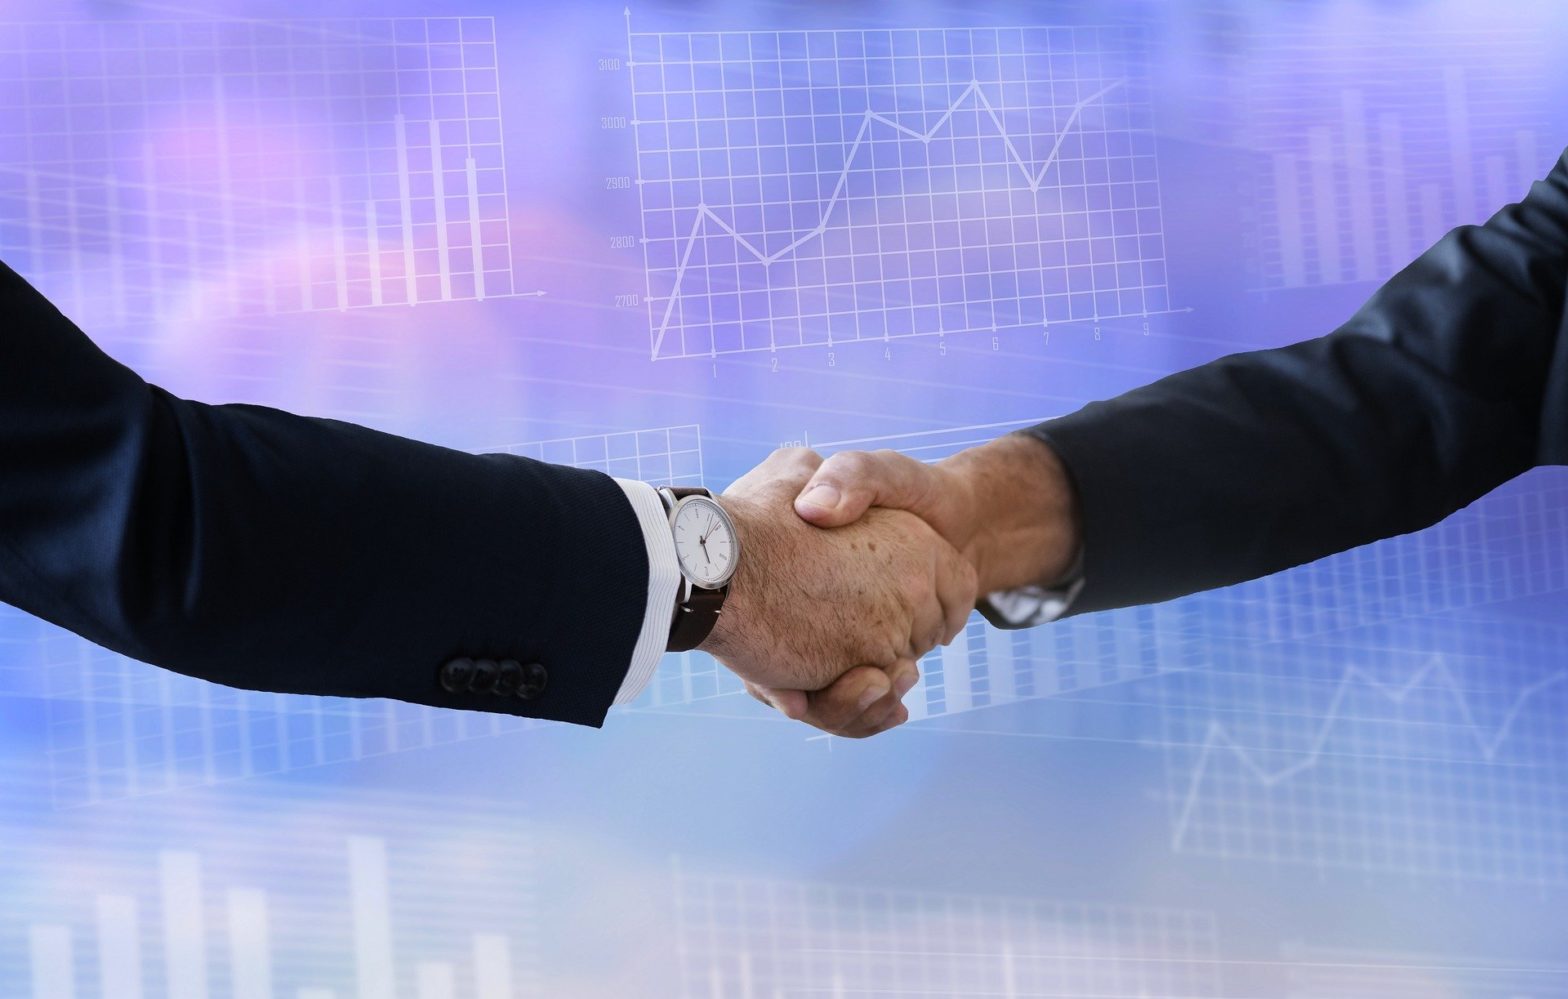 Two men in suits shaking hands against a background of financial charts and graphs.